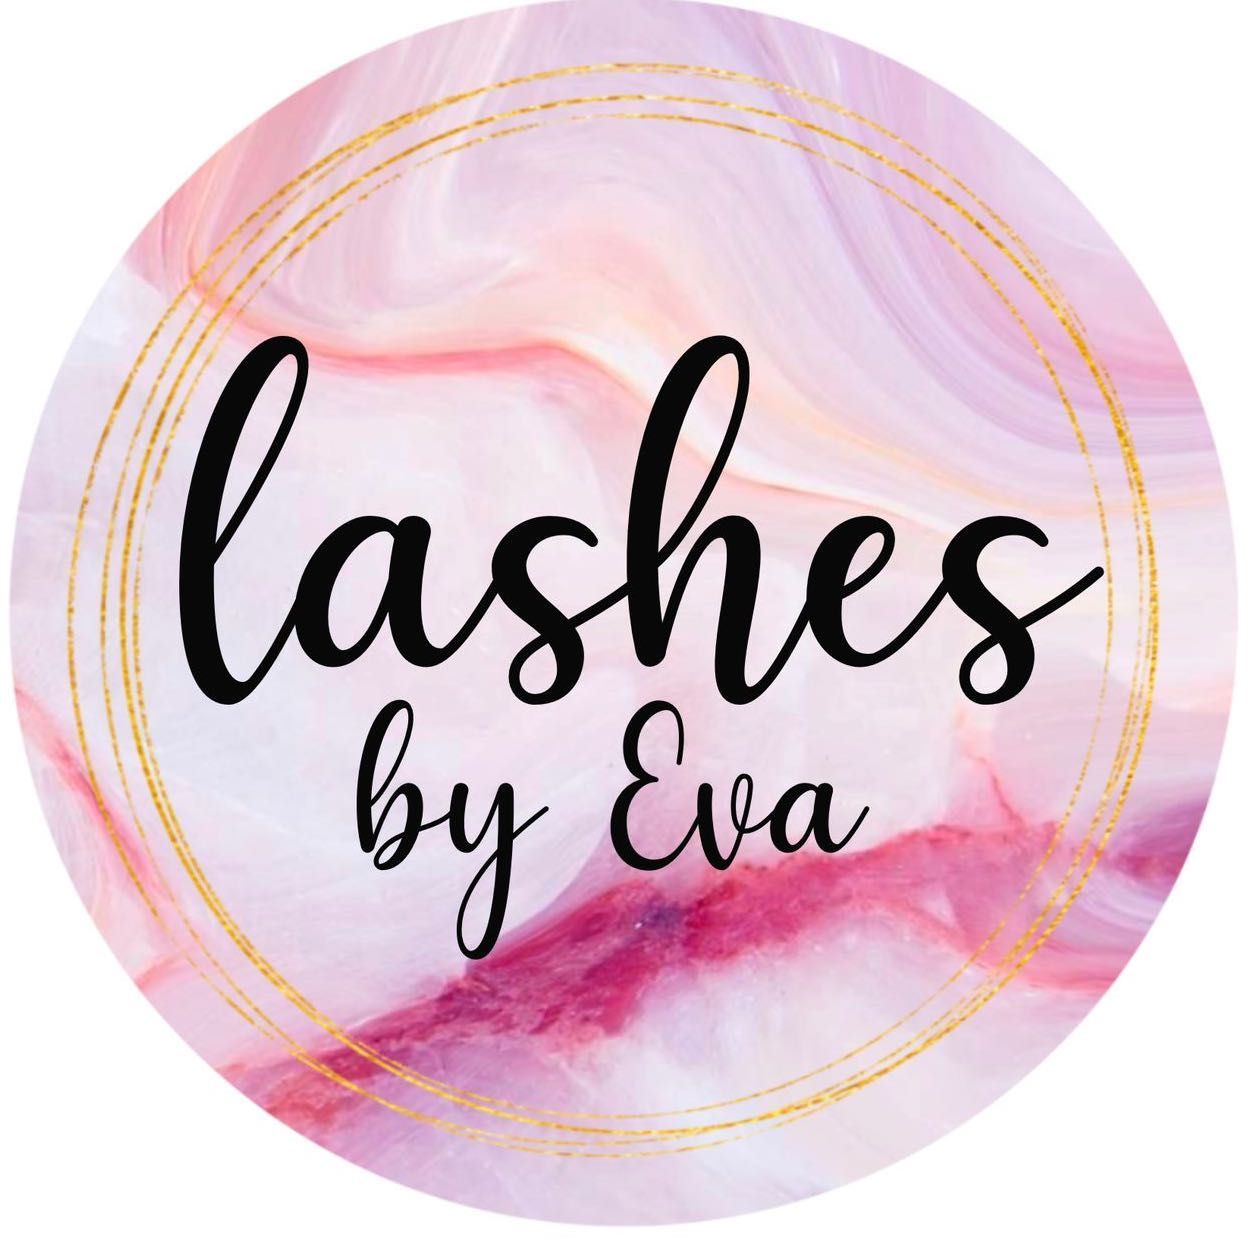 Lashes By Eva x, 46 Brooke road west, L22 7RW, Liverpool